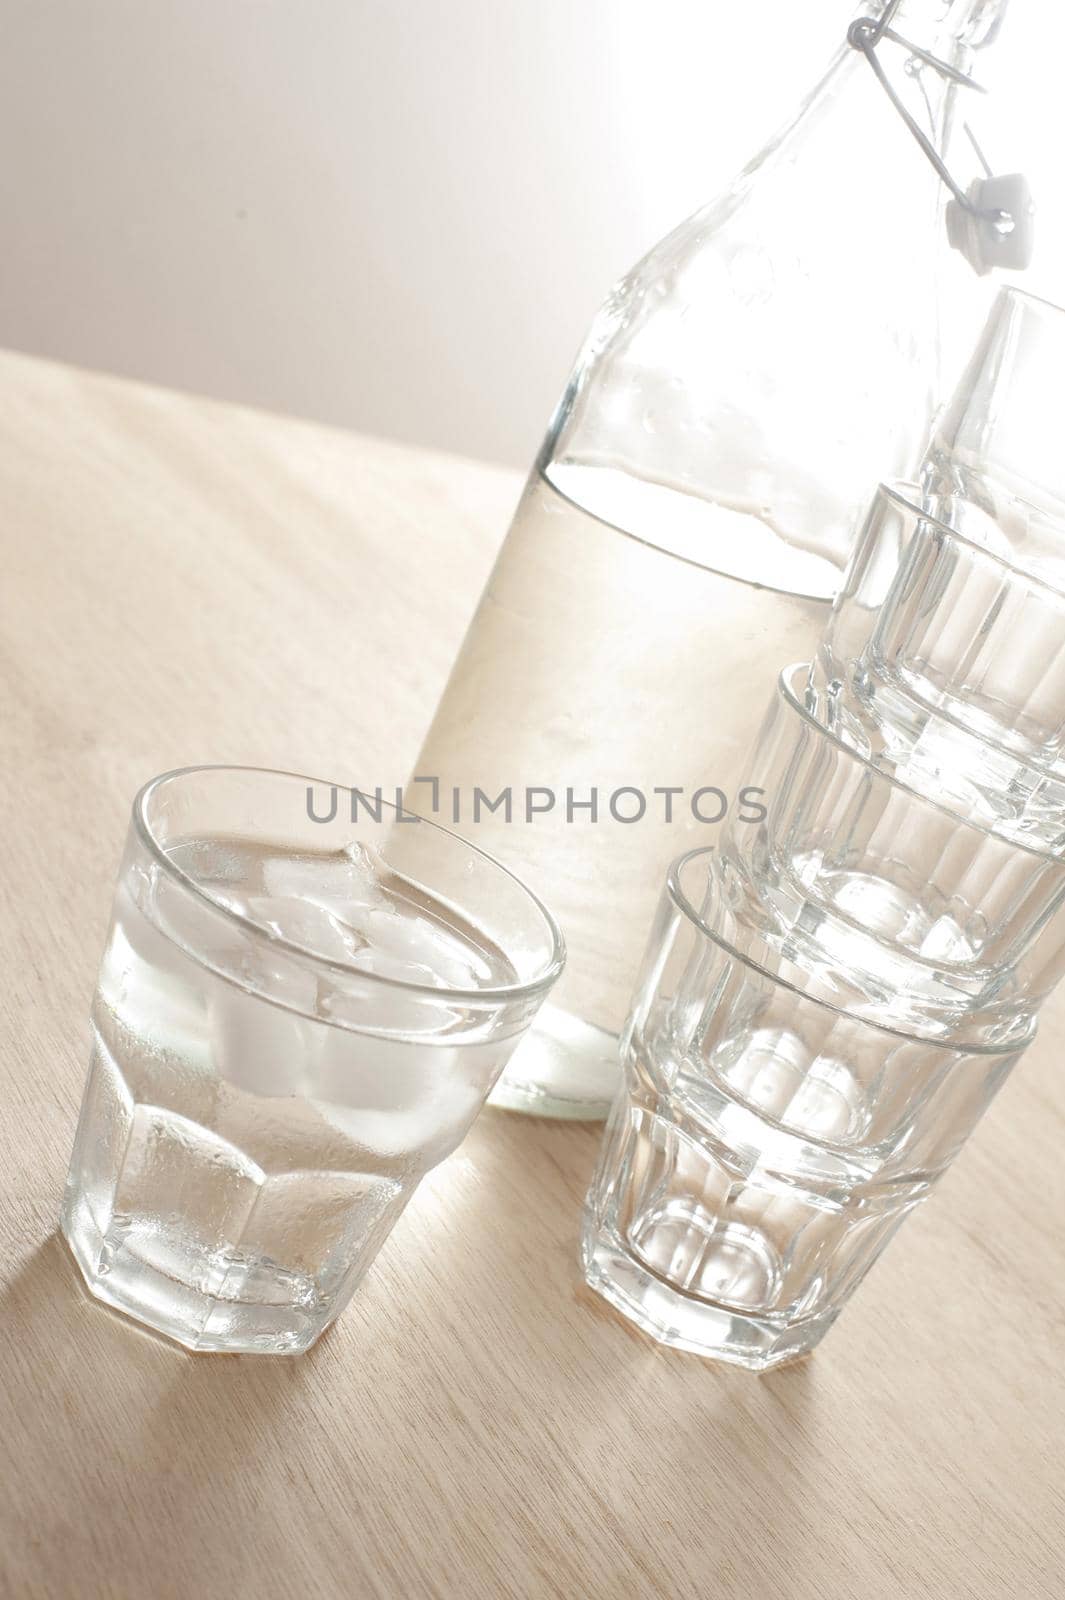 Glass of ice cold water in a tumbler with a reusable glass bottle from the refrigerator full of healthy pure water with additional empty glasses alongside